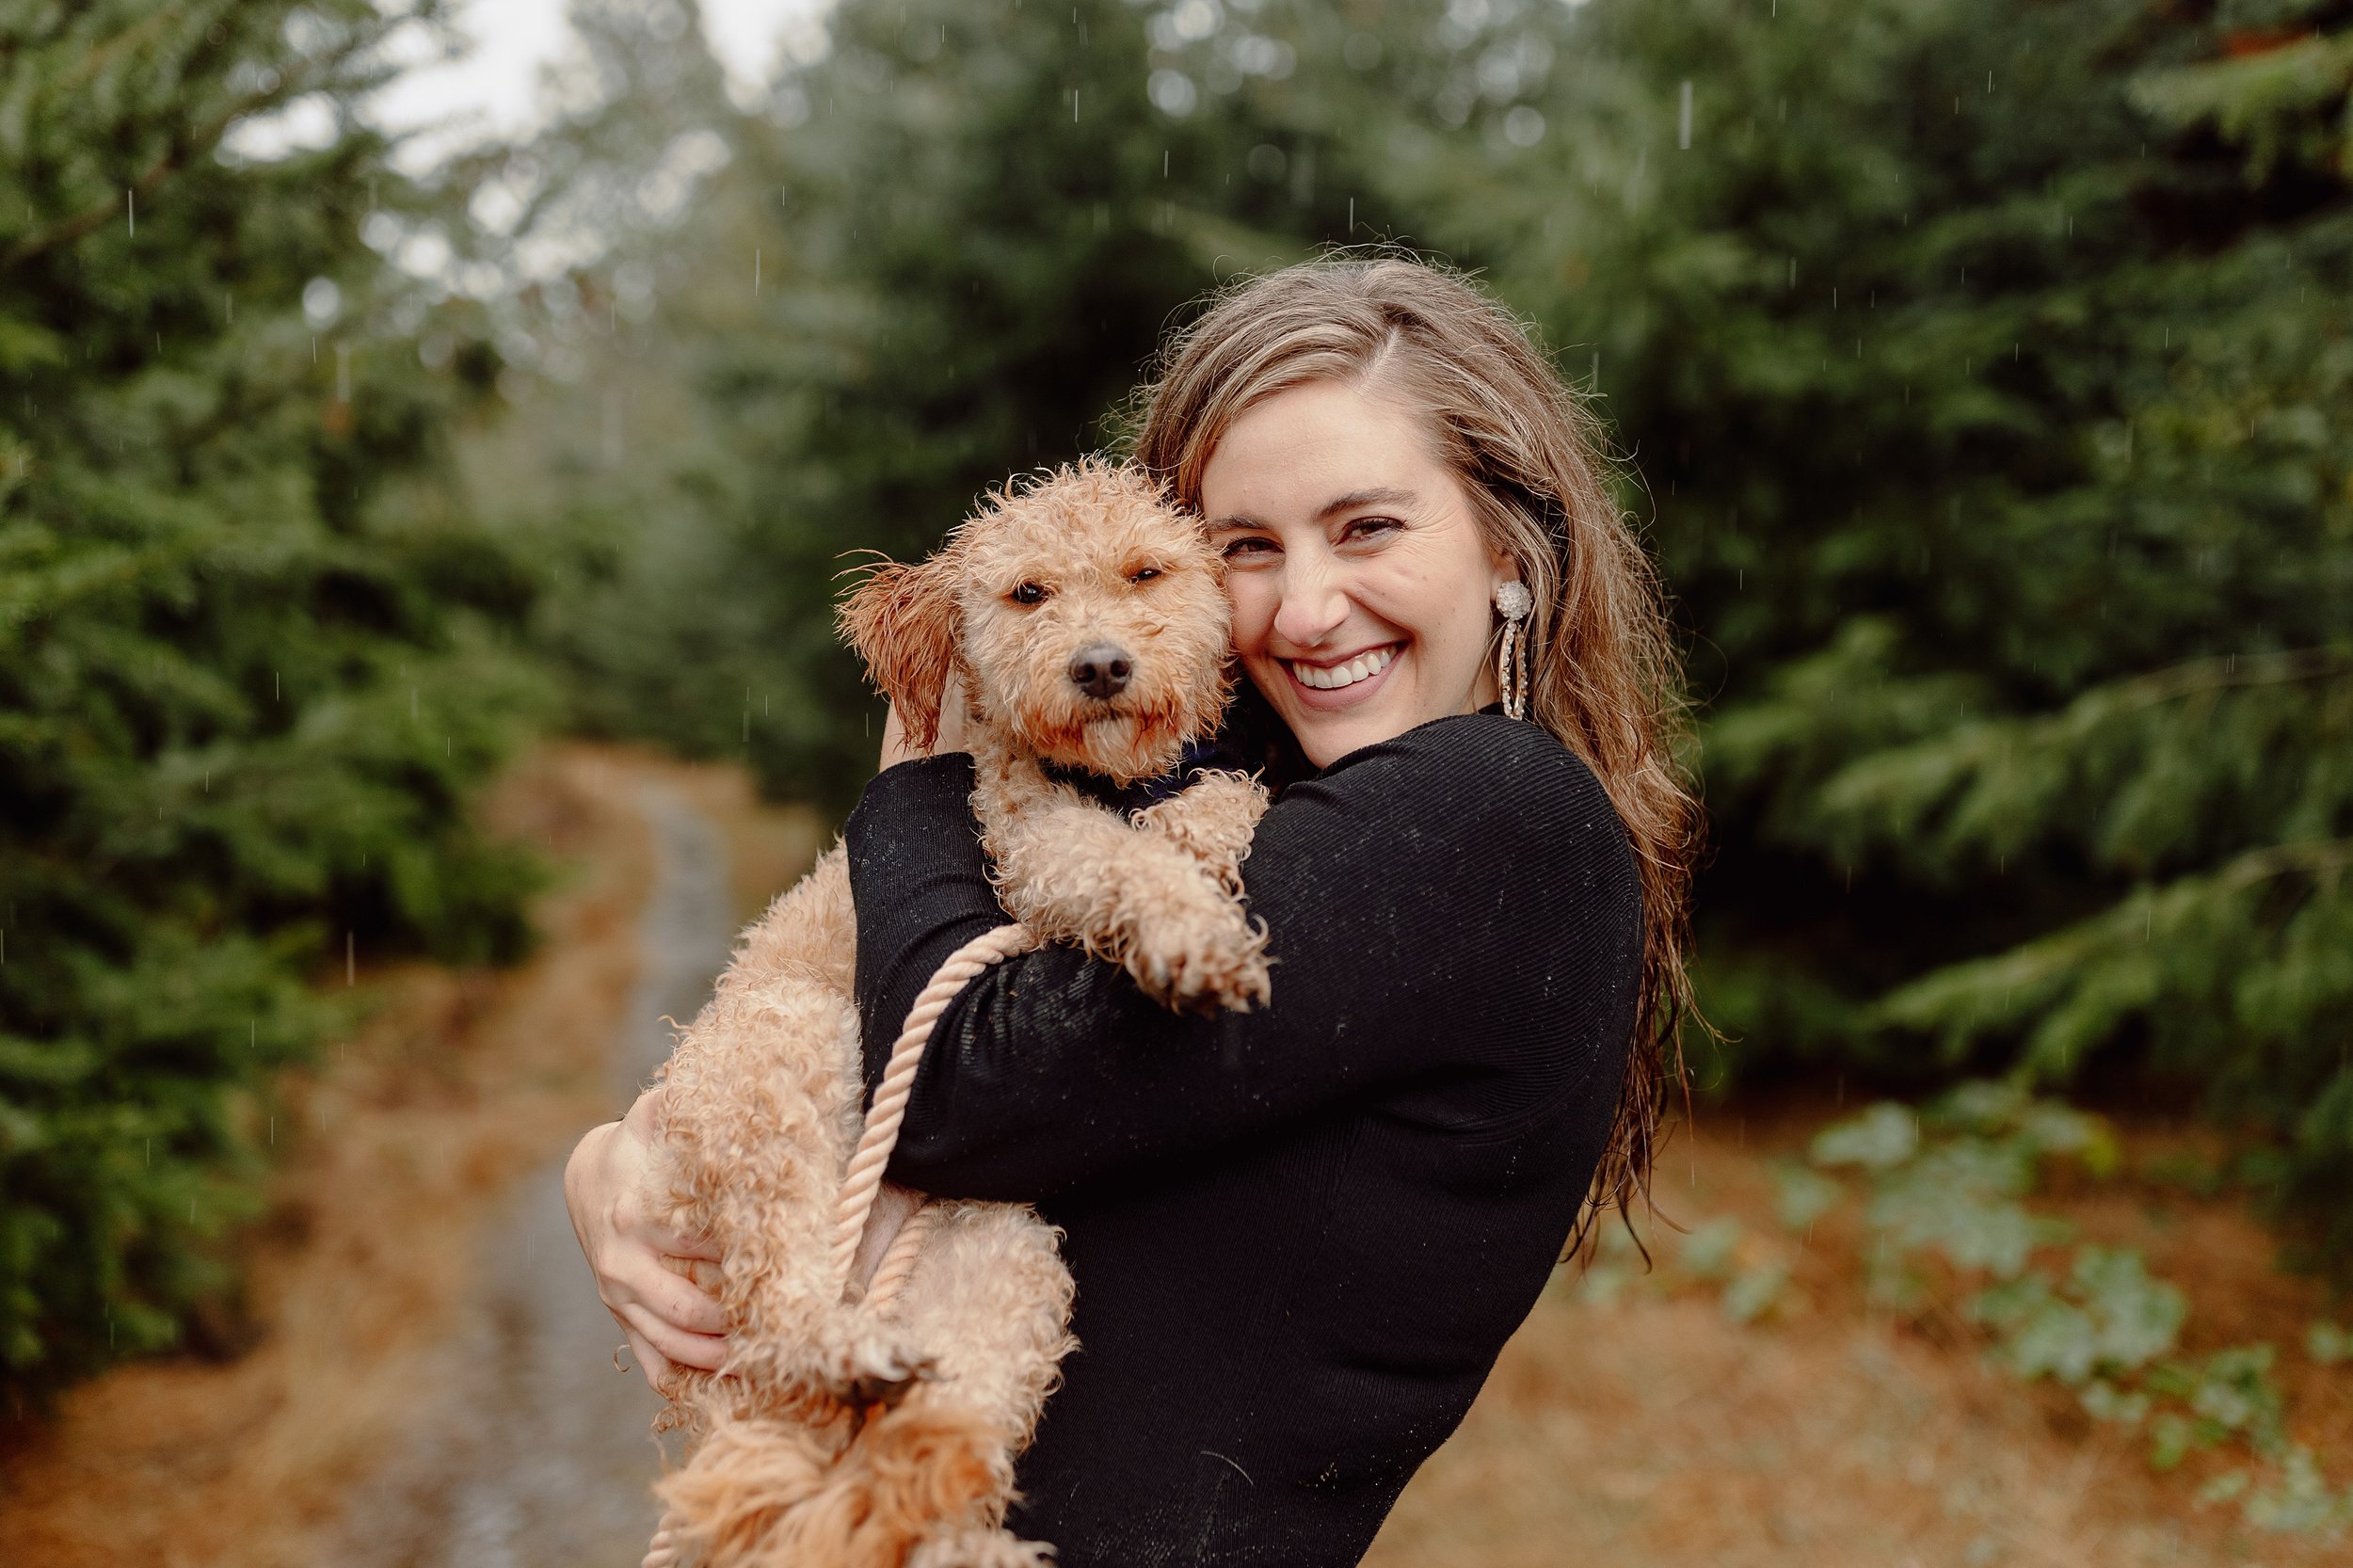 seattle_dog_puppy_maternity_session_newborn_photography_baby_home_lifestyle_fresh_48_session_pnw_0108.jpg